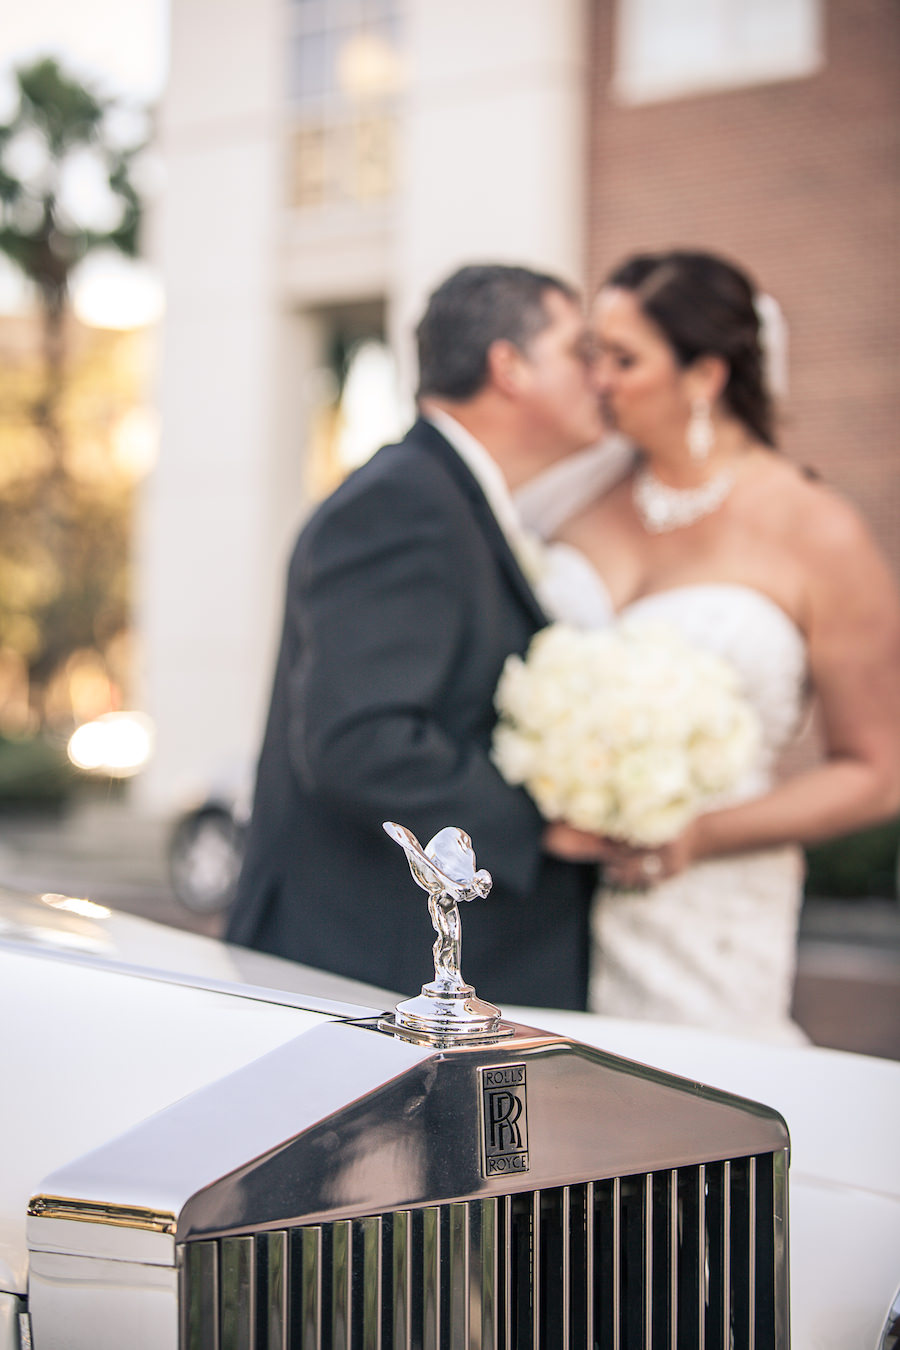 Bride and Groom Outdoor Downtown Tampa Wedding Portrait on Brick Road with Vintage Rolls Royce Car | Tampa Wedding Planner UNIQUE Weddings and Events